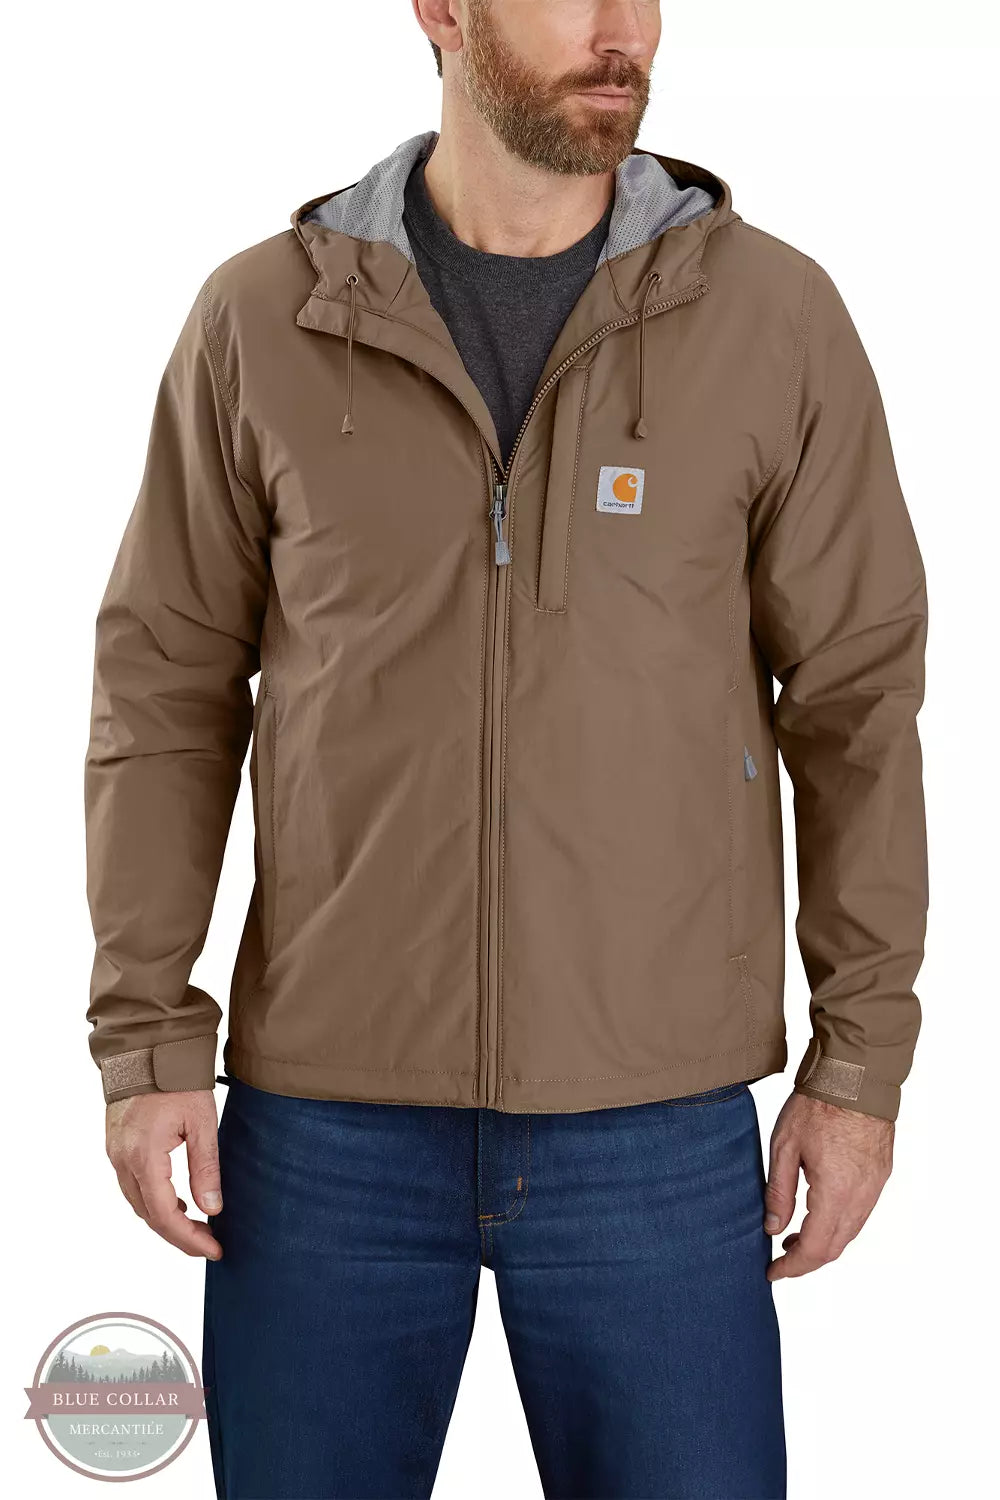 Carhartt 104671-B66 Rain Defender Relaxed Fit Lightweight Jacket in Flaxseed Front View